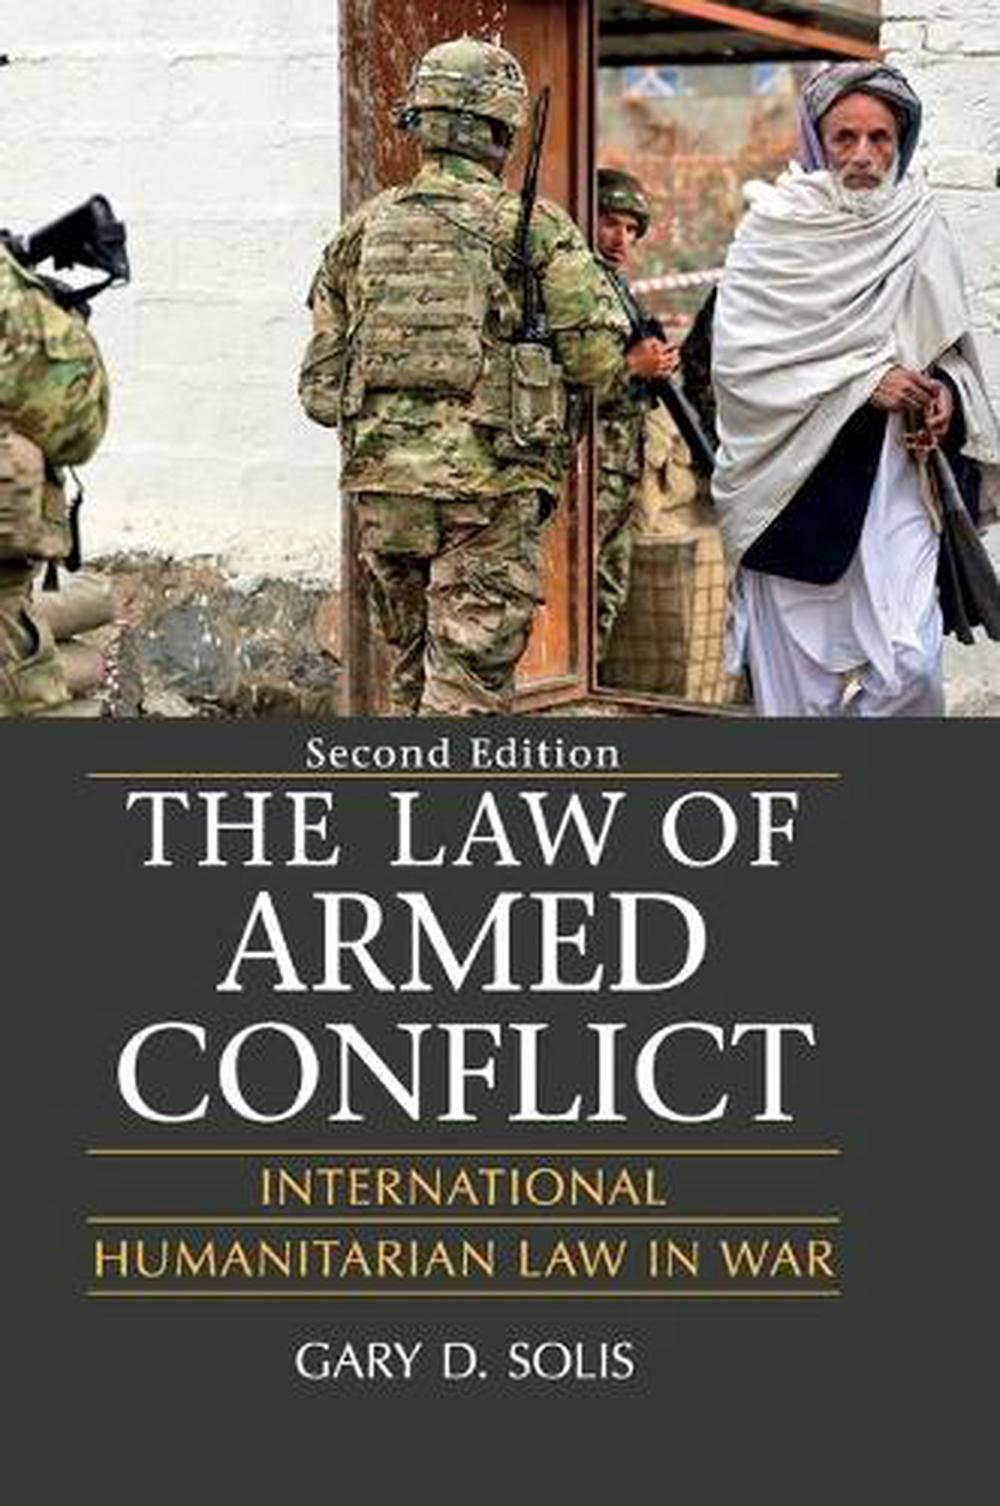 current armed conflicts in the woprld